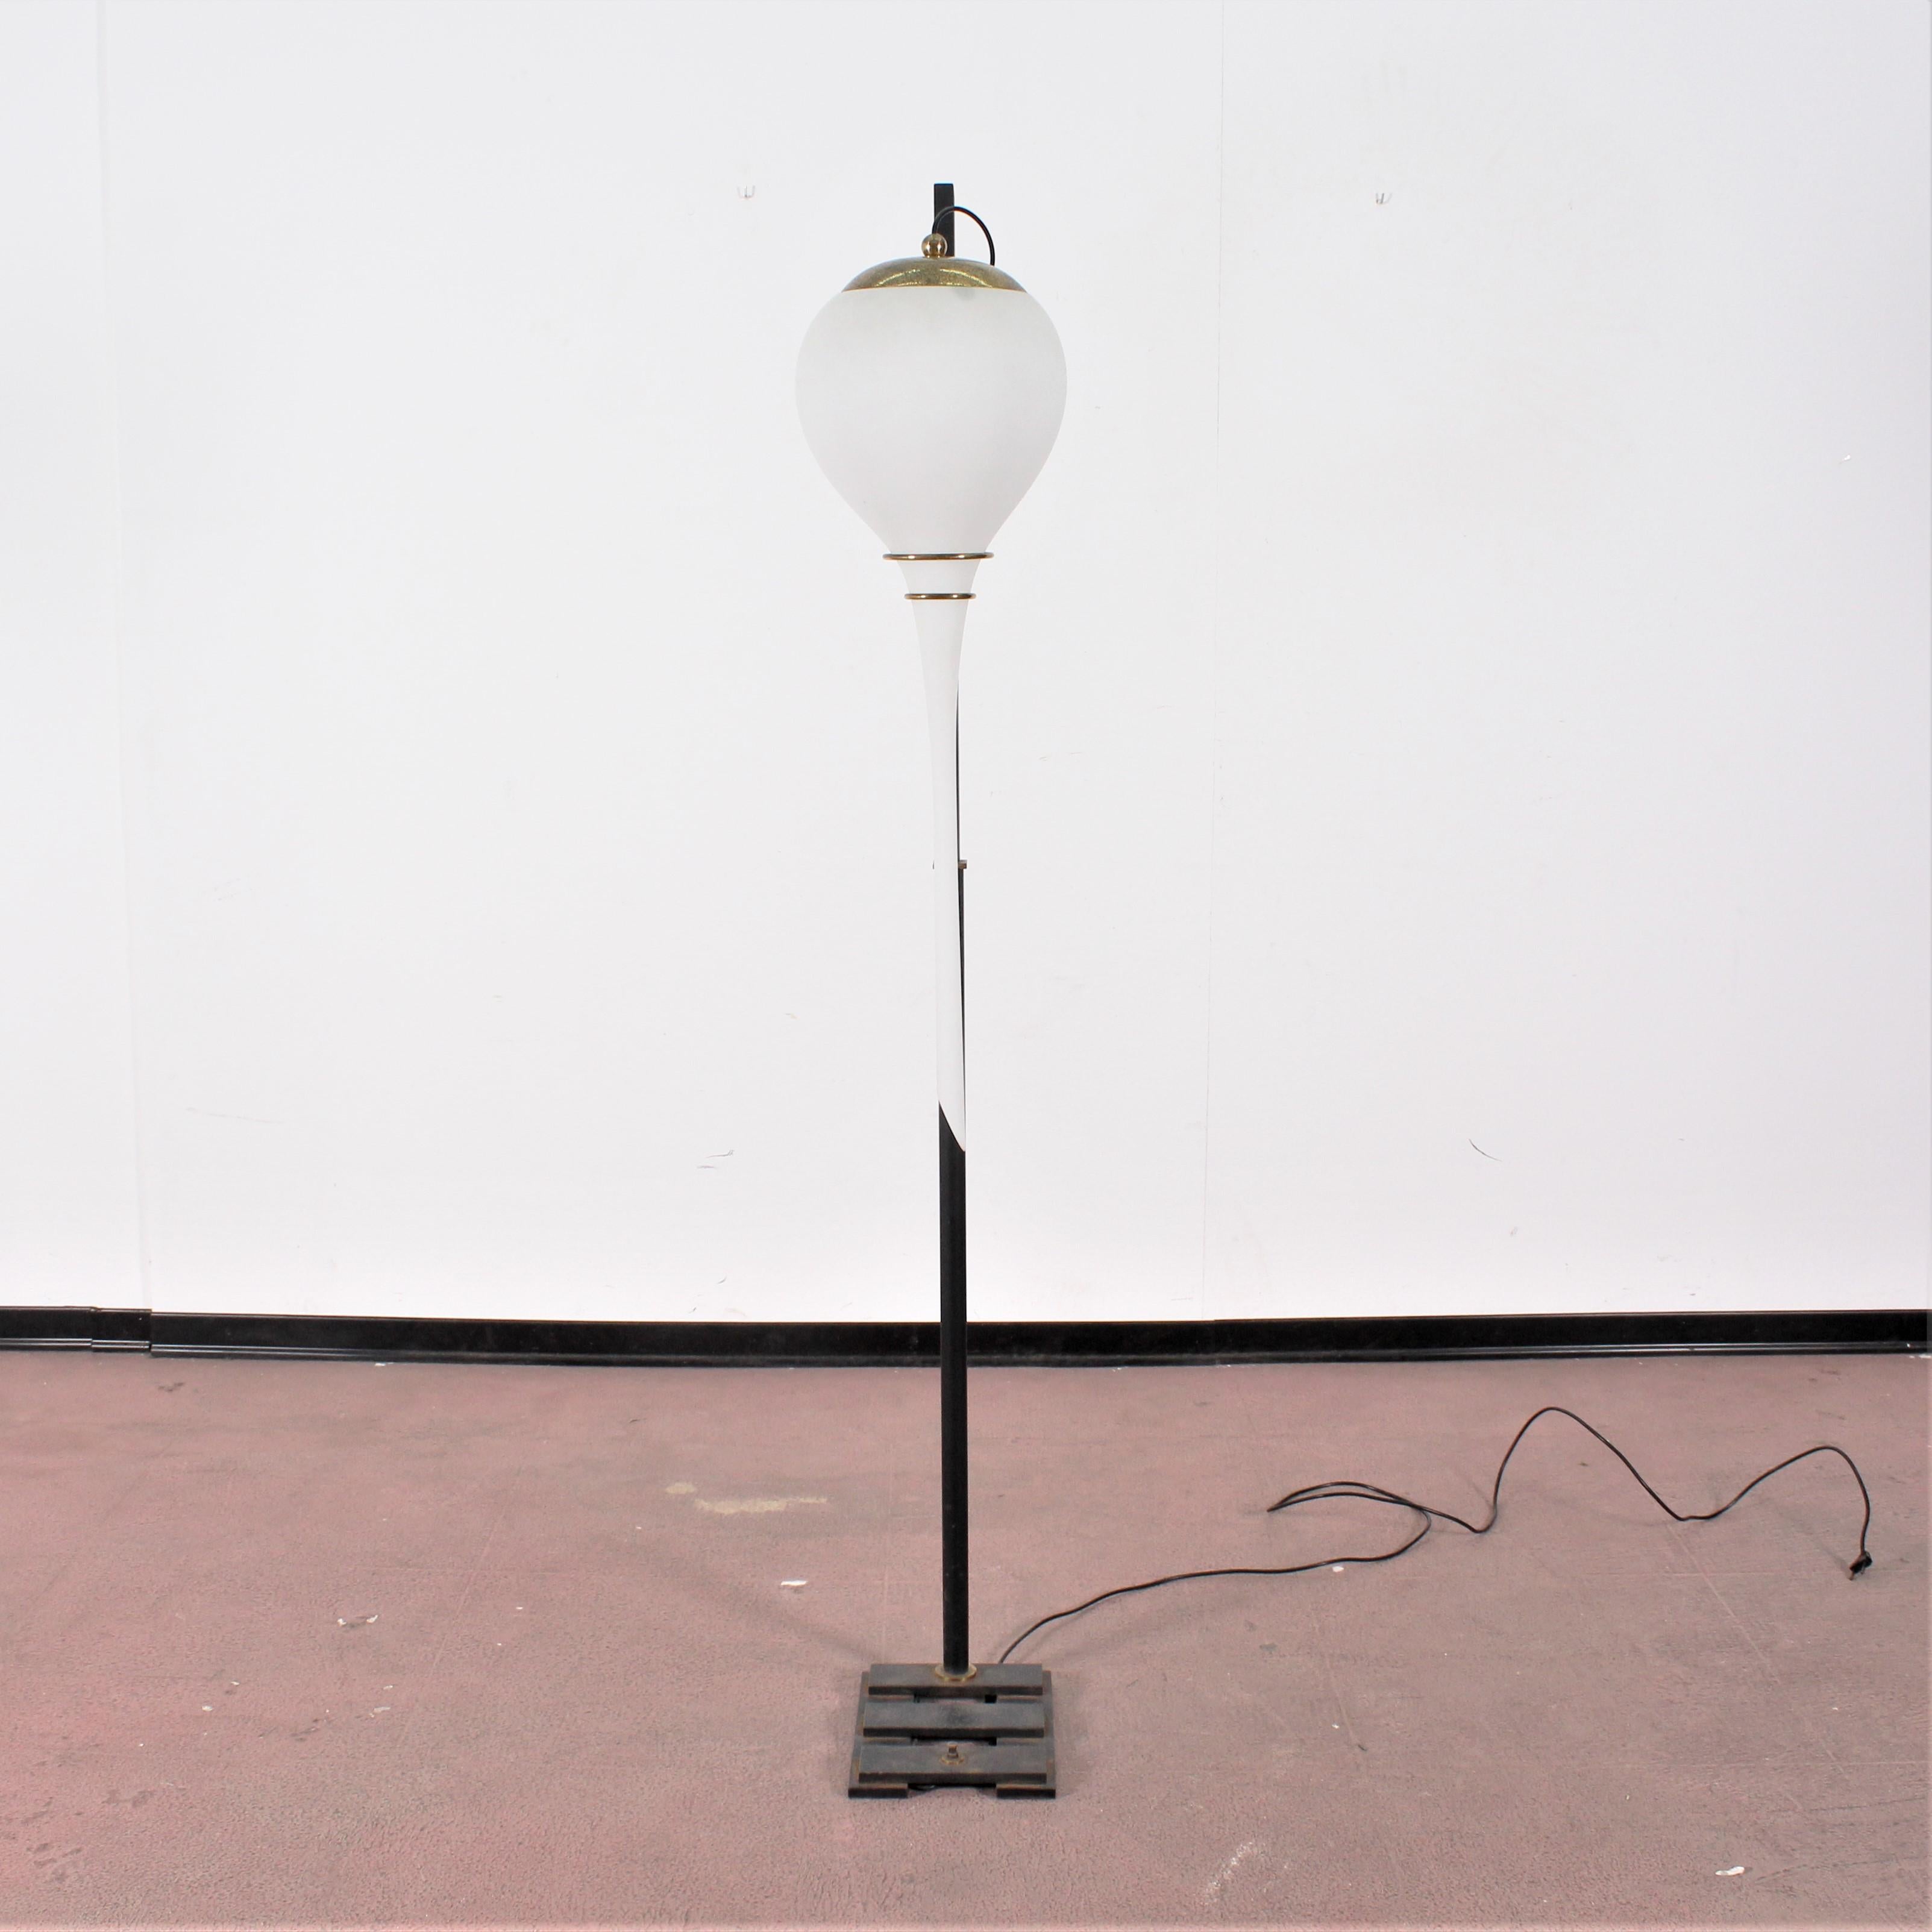 Stilnovo floor lamp designed and manufactured in Italy, 1950s. The lamp is made of metal and white opaline glass. 
Wear consistent with age and use.